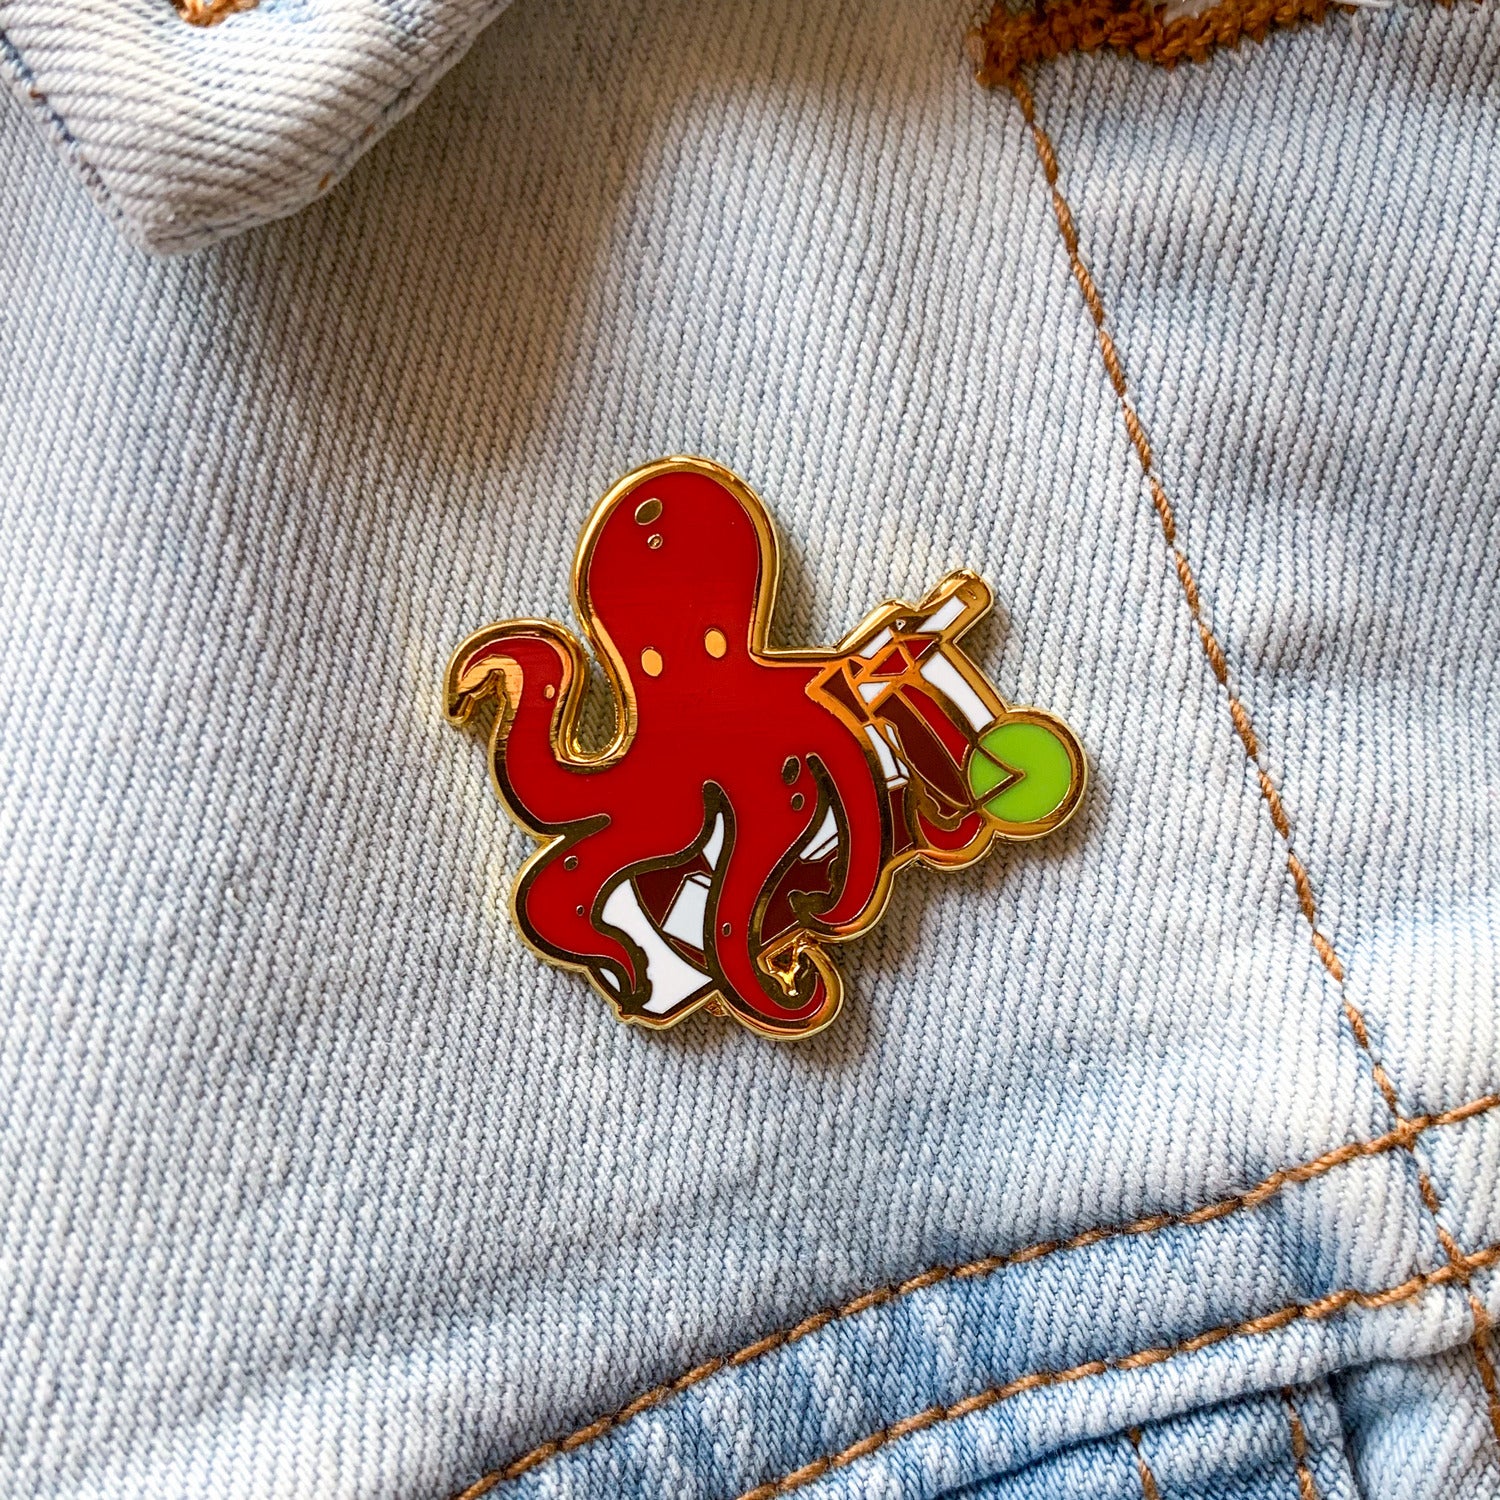 Octopus and Dark n' Stormy Cocktail Hard Enamel Pin by Cocktail Critters on Denim